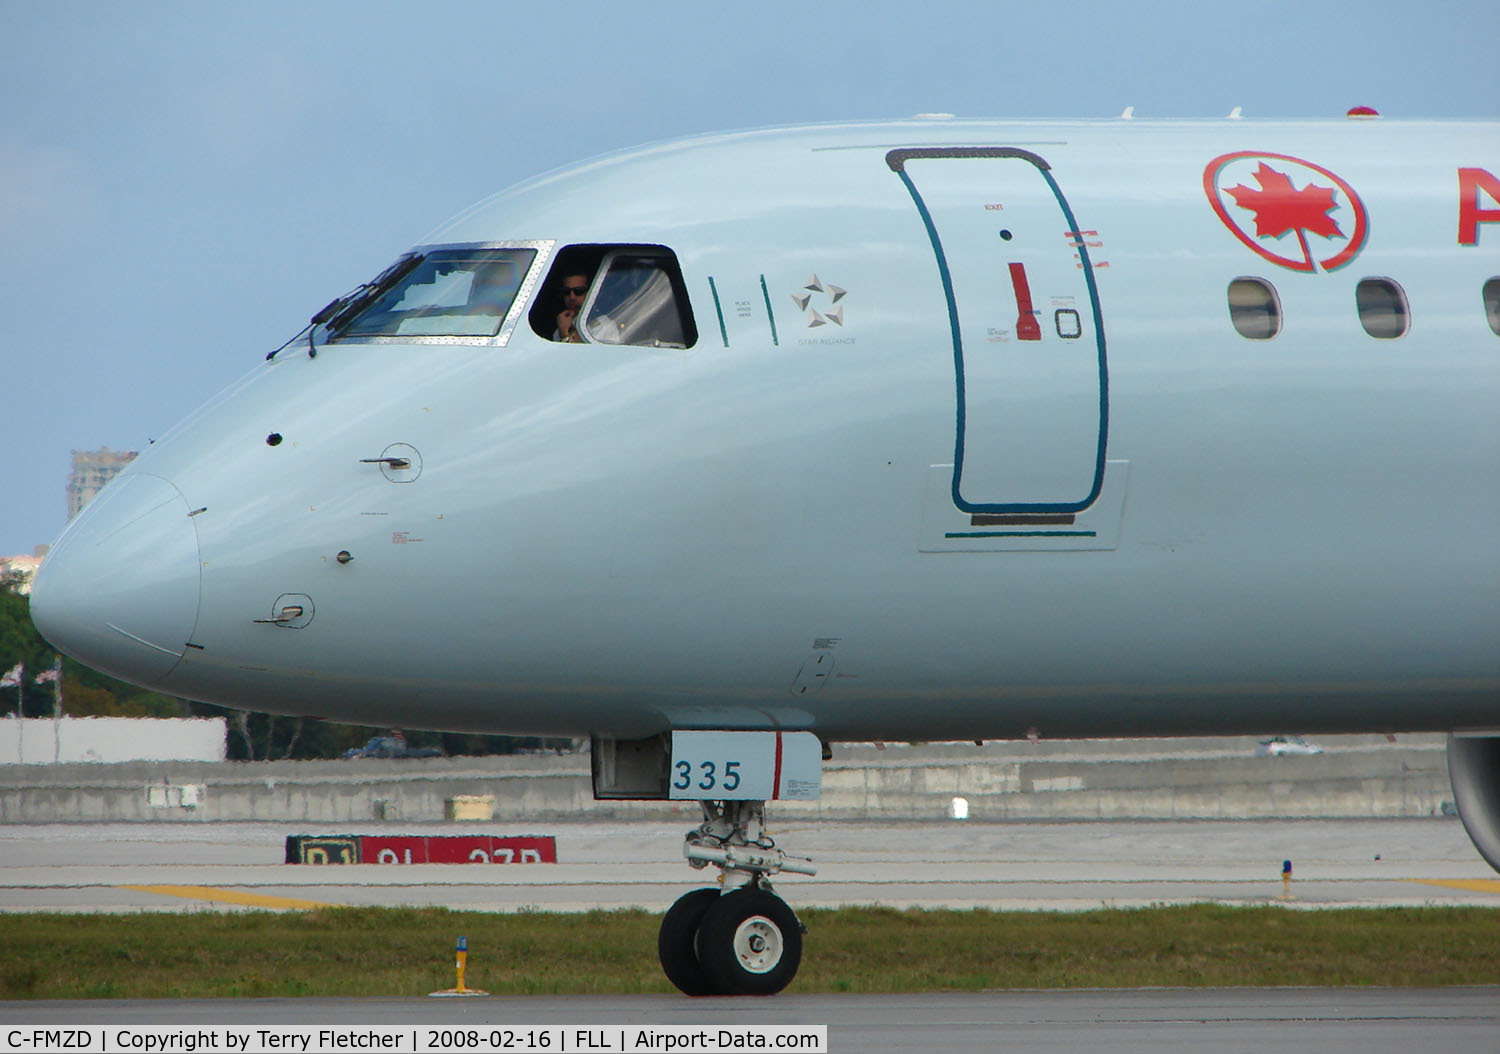 C-FMZD, 2007 Embraer 190AR (ERJ-190-100IGW) C/N 19000115, The pilot of this Air Canada EMB190 looks a bit bemused by all the attention from the photographers